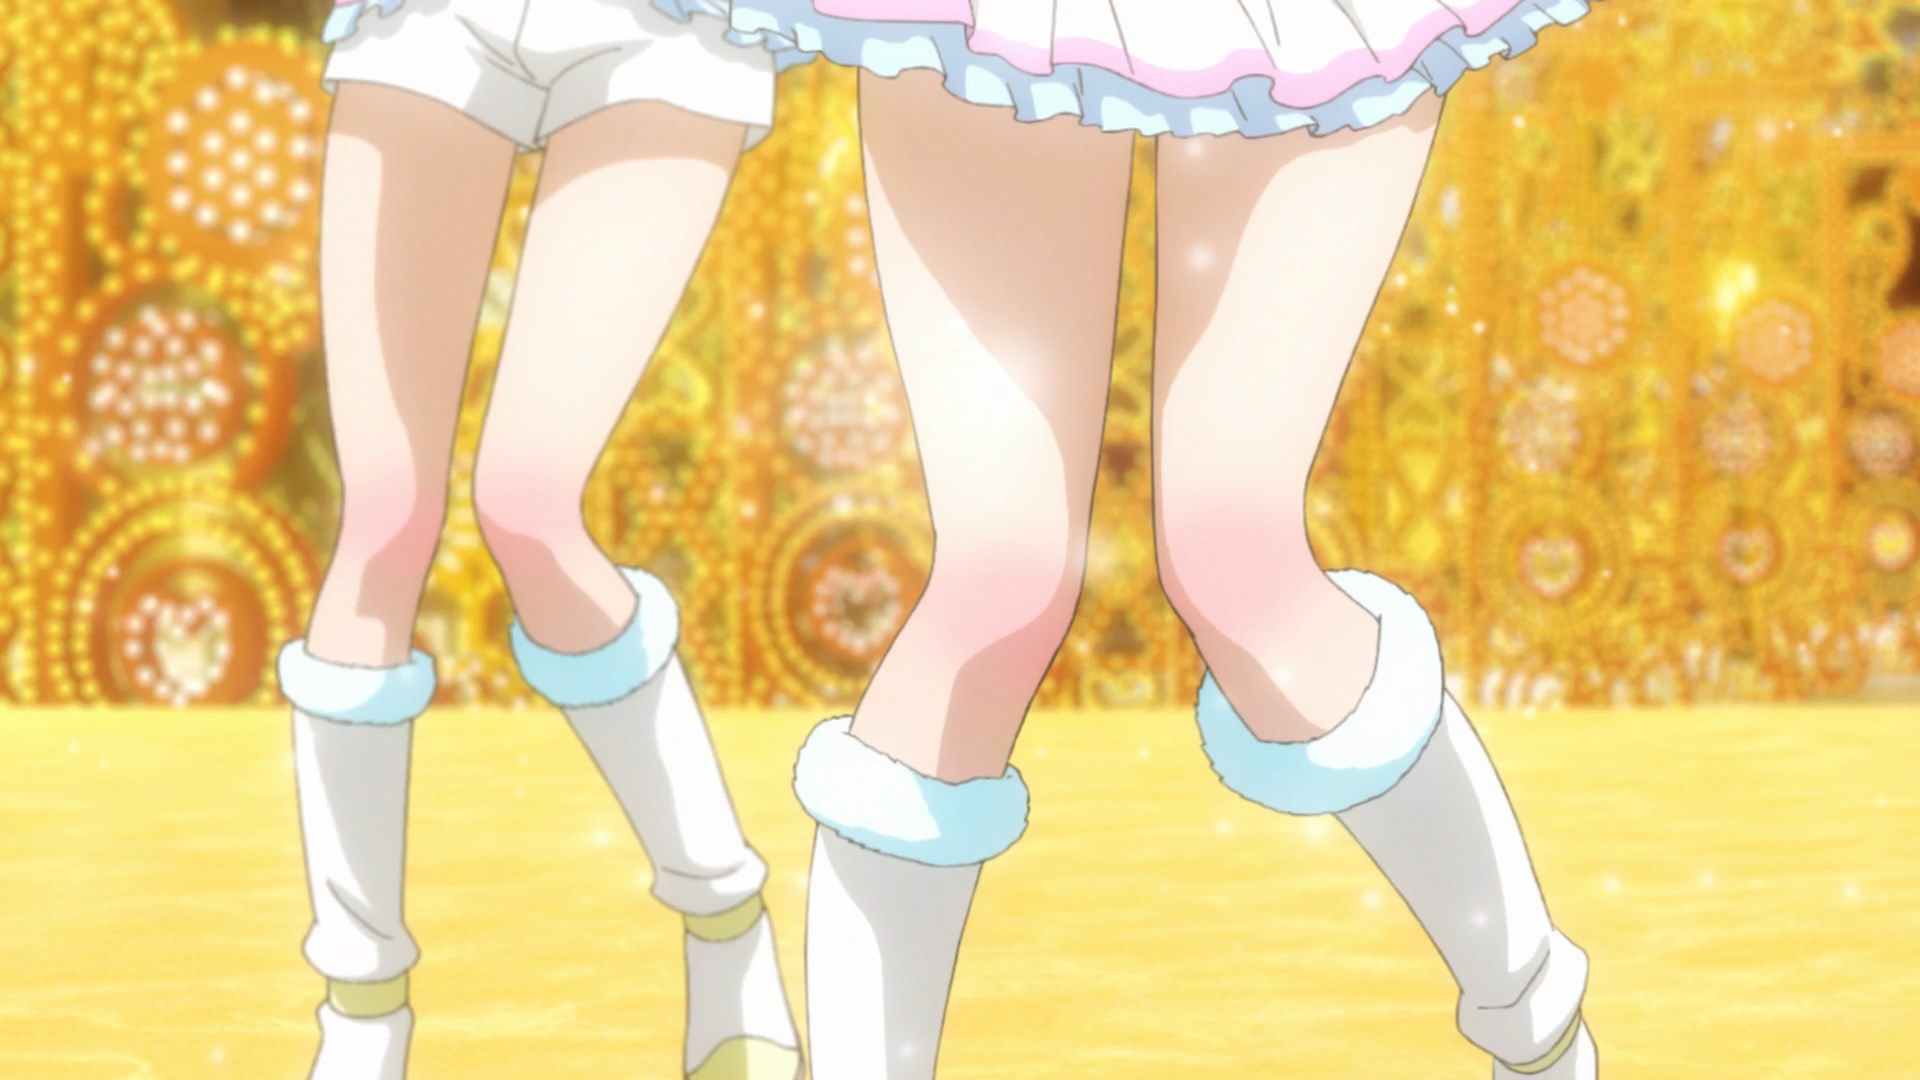 [God images] "love live! ' Μm ' PV's leg is too erotic everyone wakes up to a leg fetish of wwwww 72